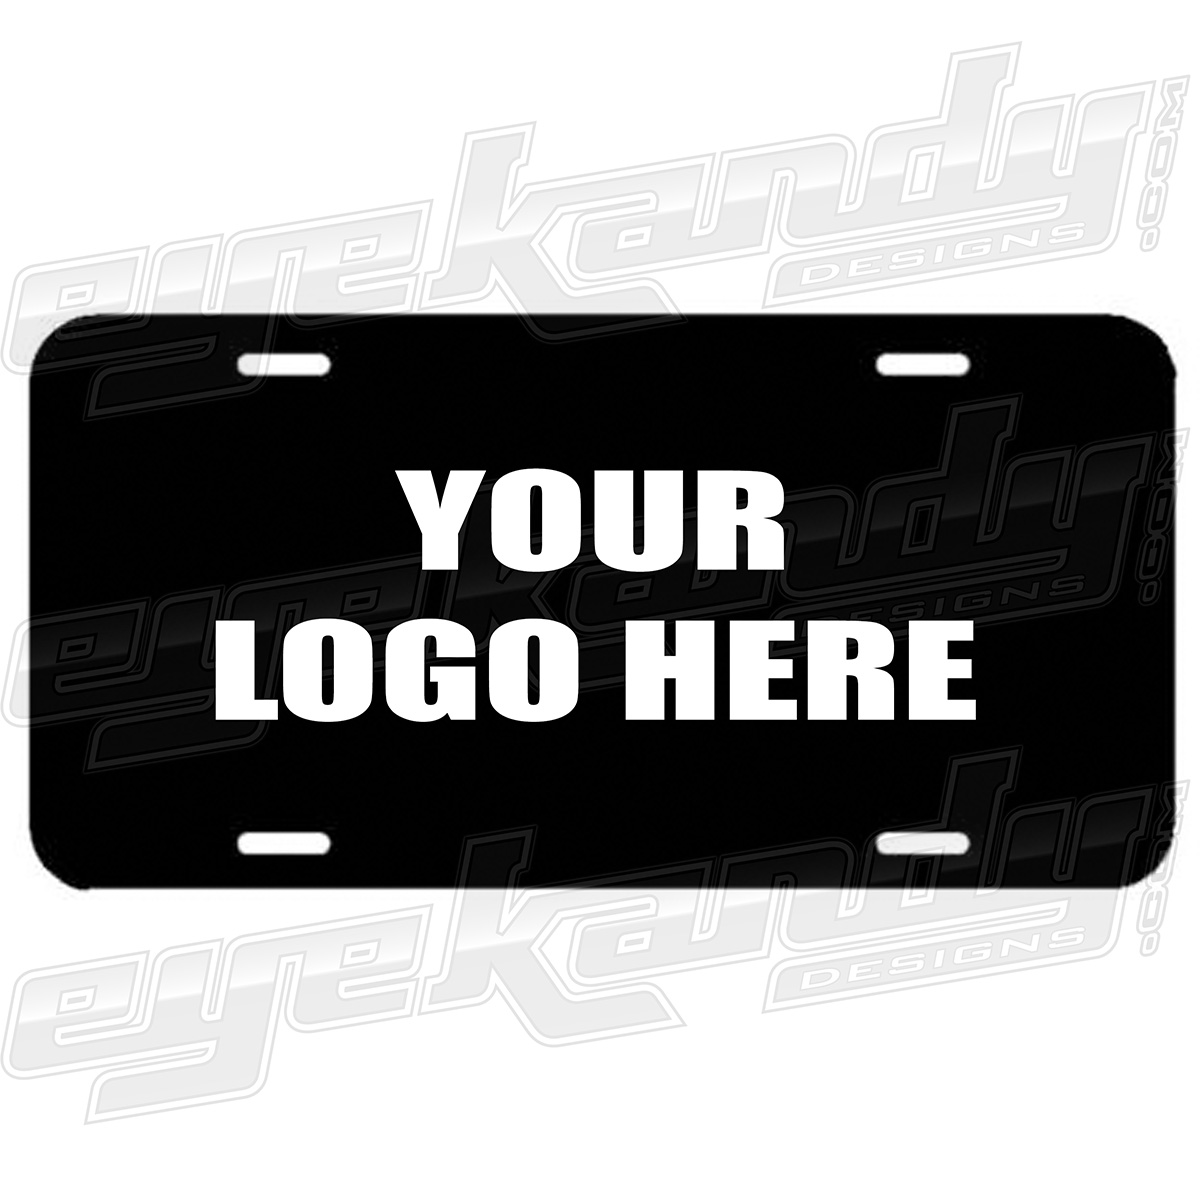 VC - Stainless Steel License Plate Gloss Black -Free Shipping